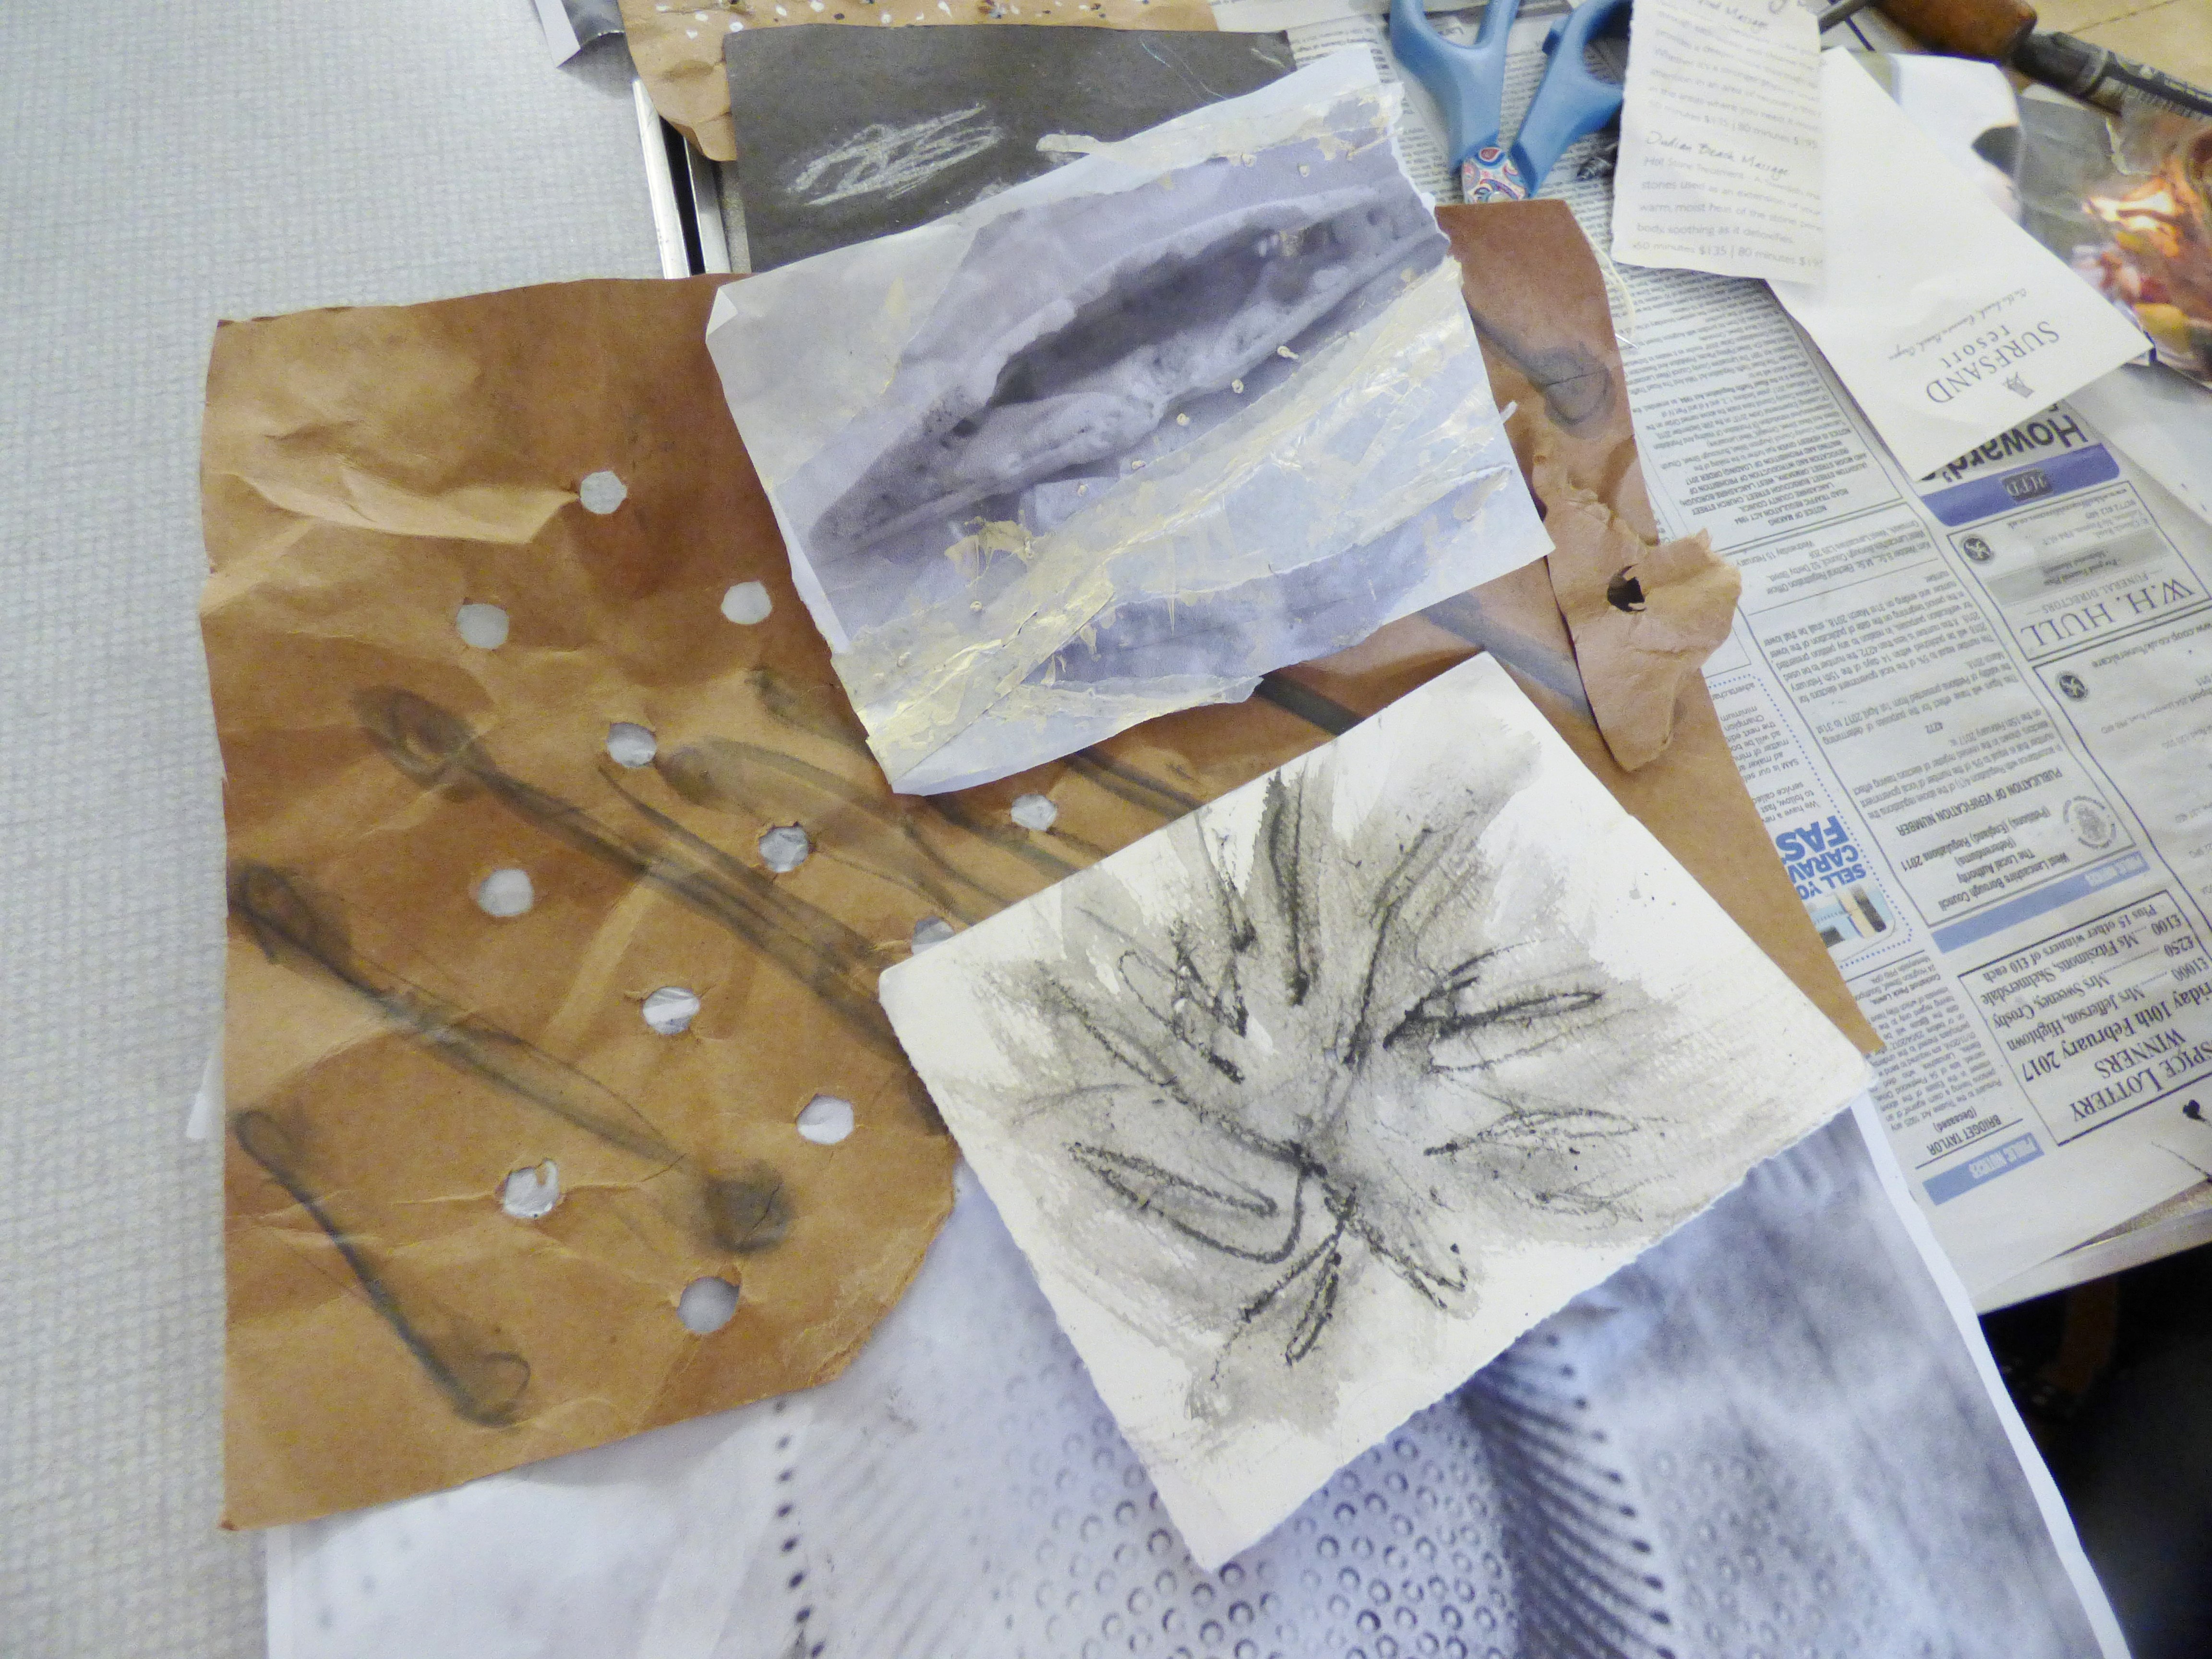 students work at "Fabulous Fragments" workshop with Shelley Rhodes 2017